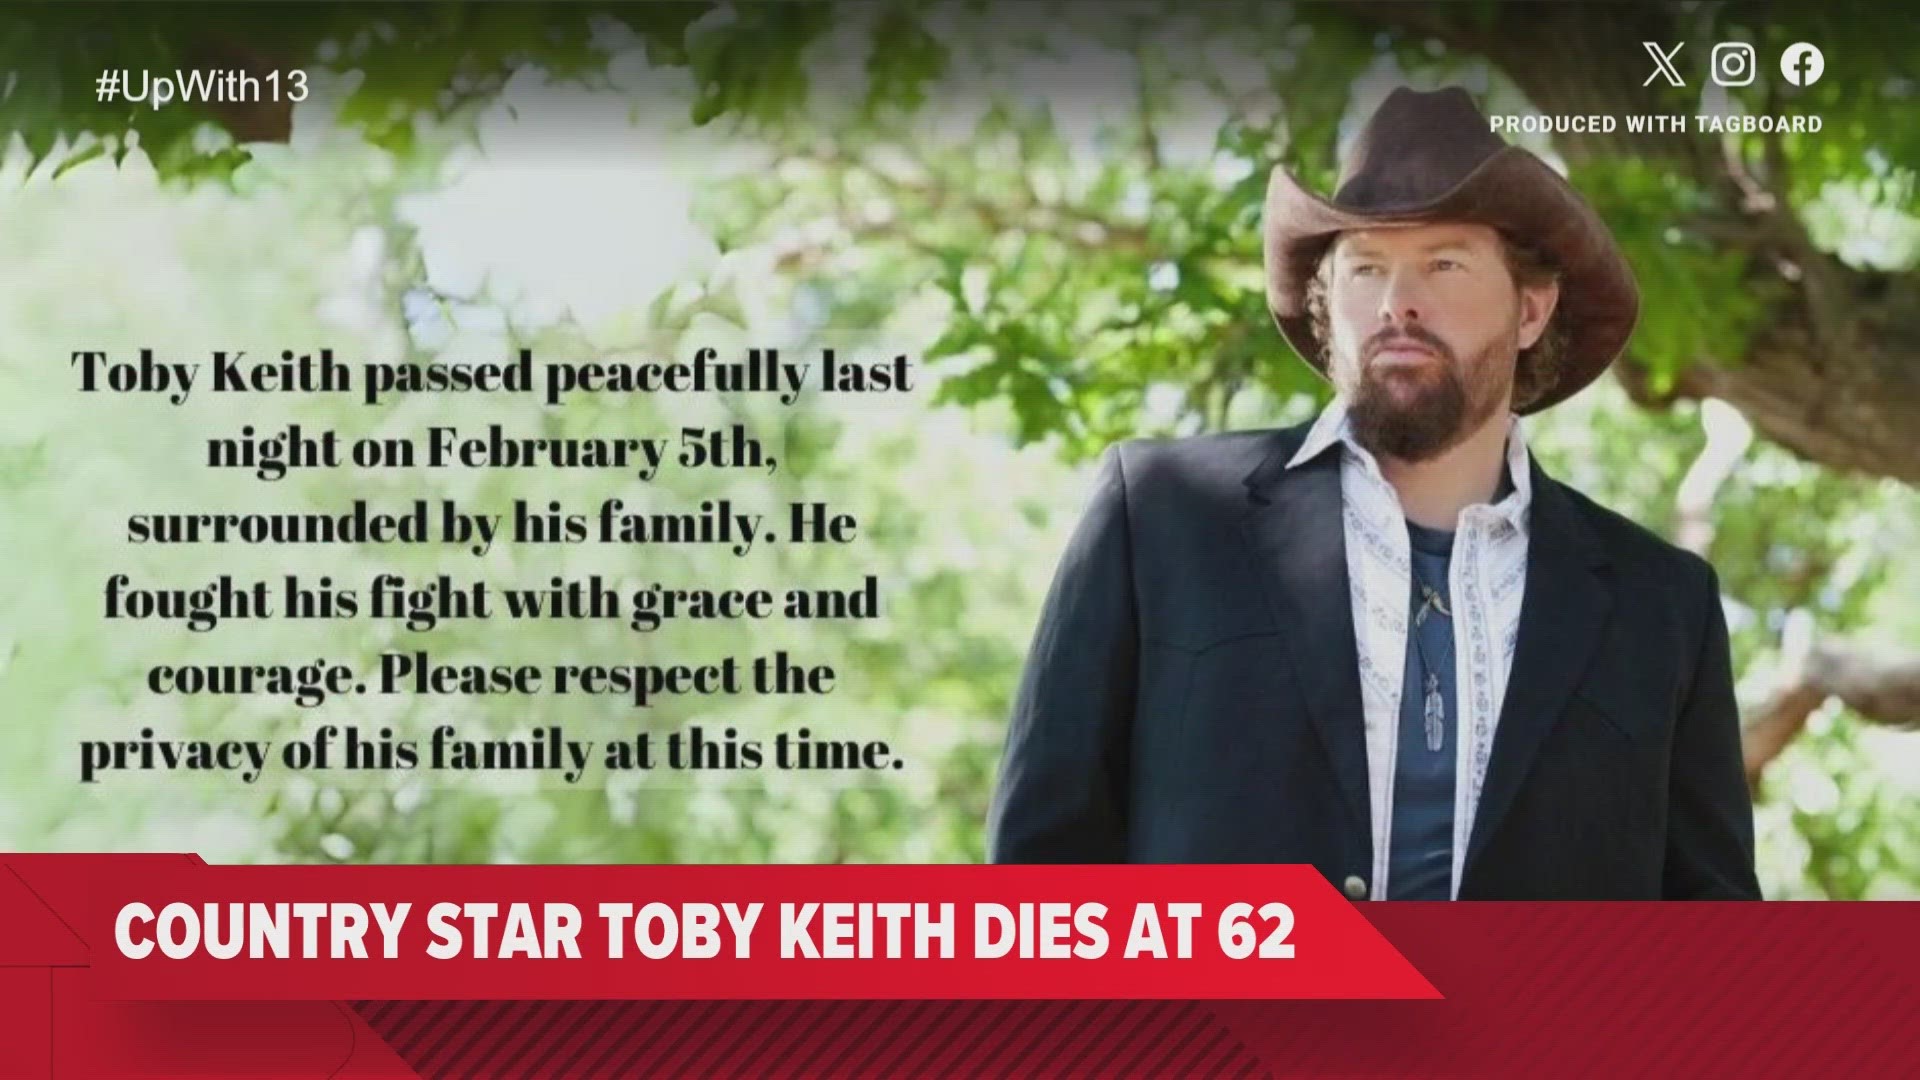 According to a statement posted on the country singer’s website, Keith, who was battling stomach cancer, passed peacefully on Monday surrounded by his family.